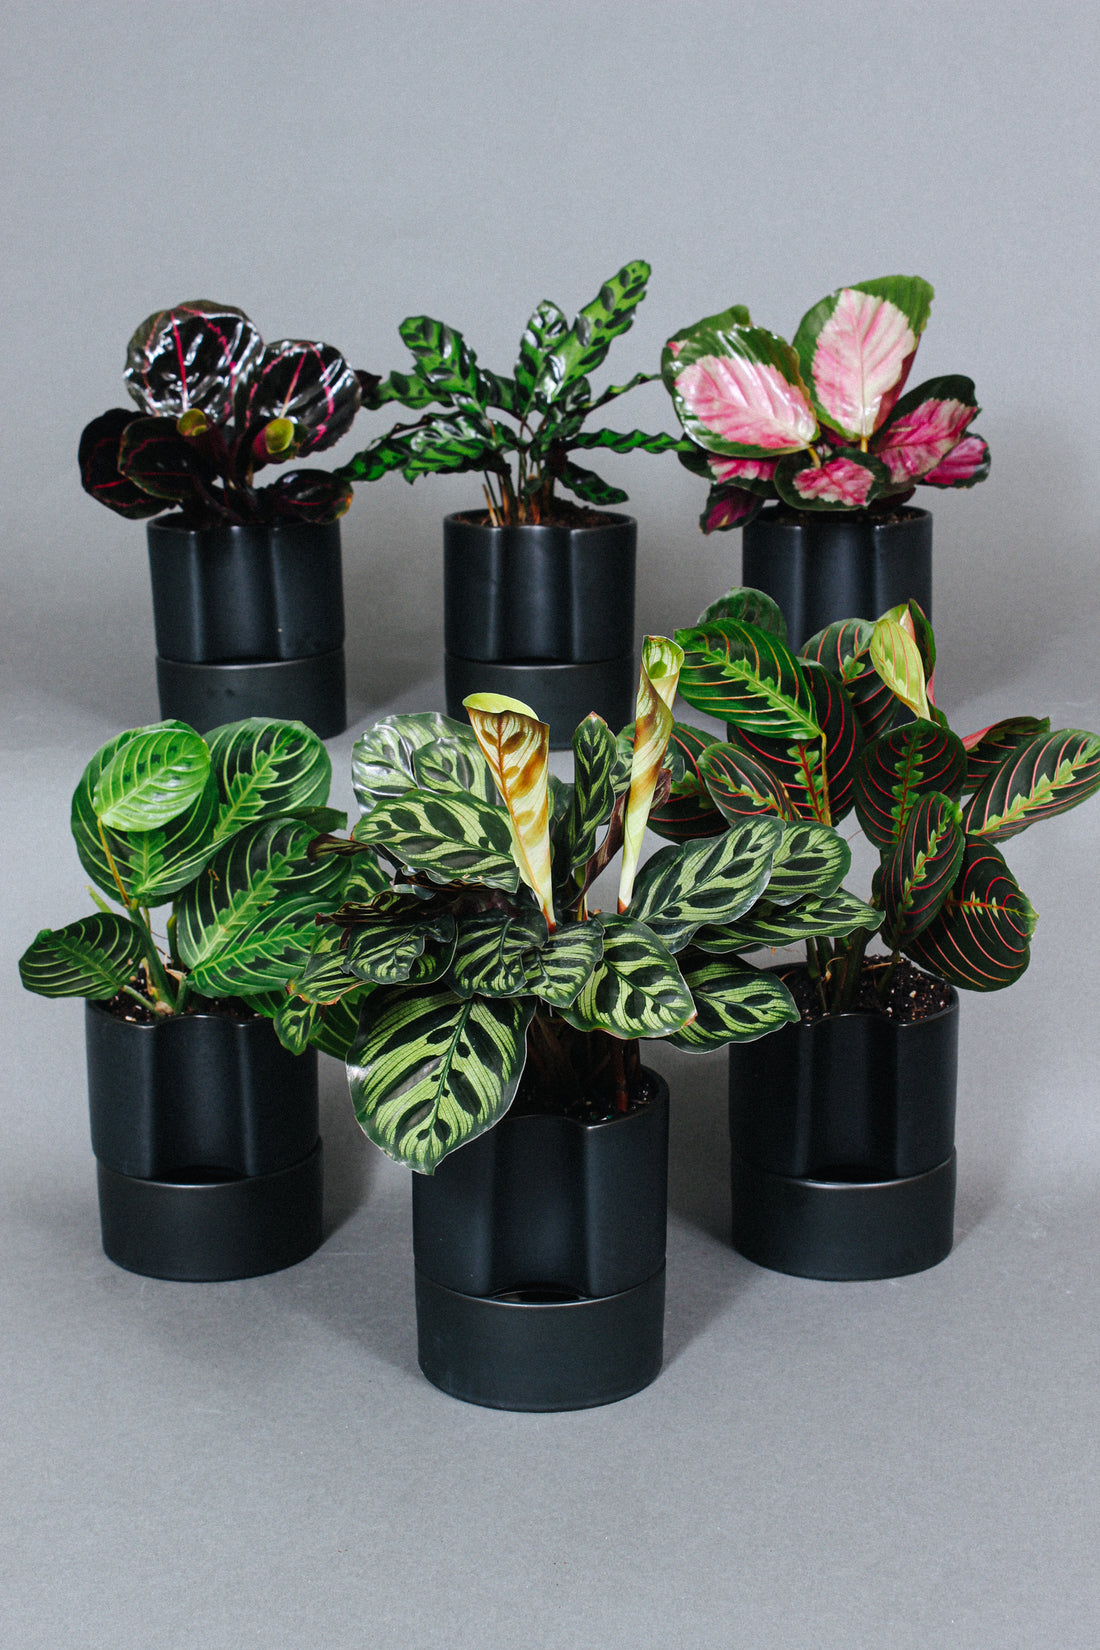 A group of Prayer Plants and Calatheas together.